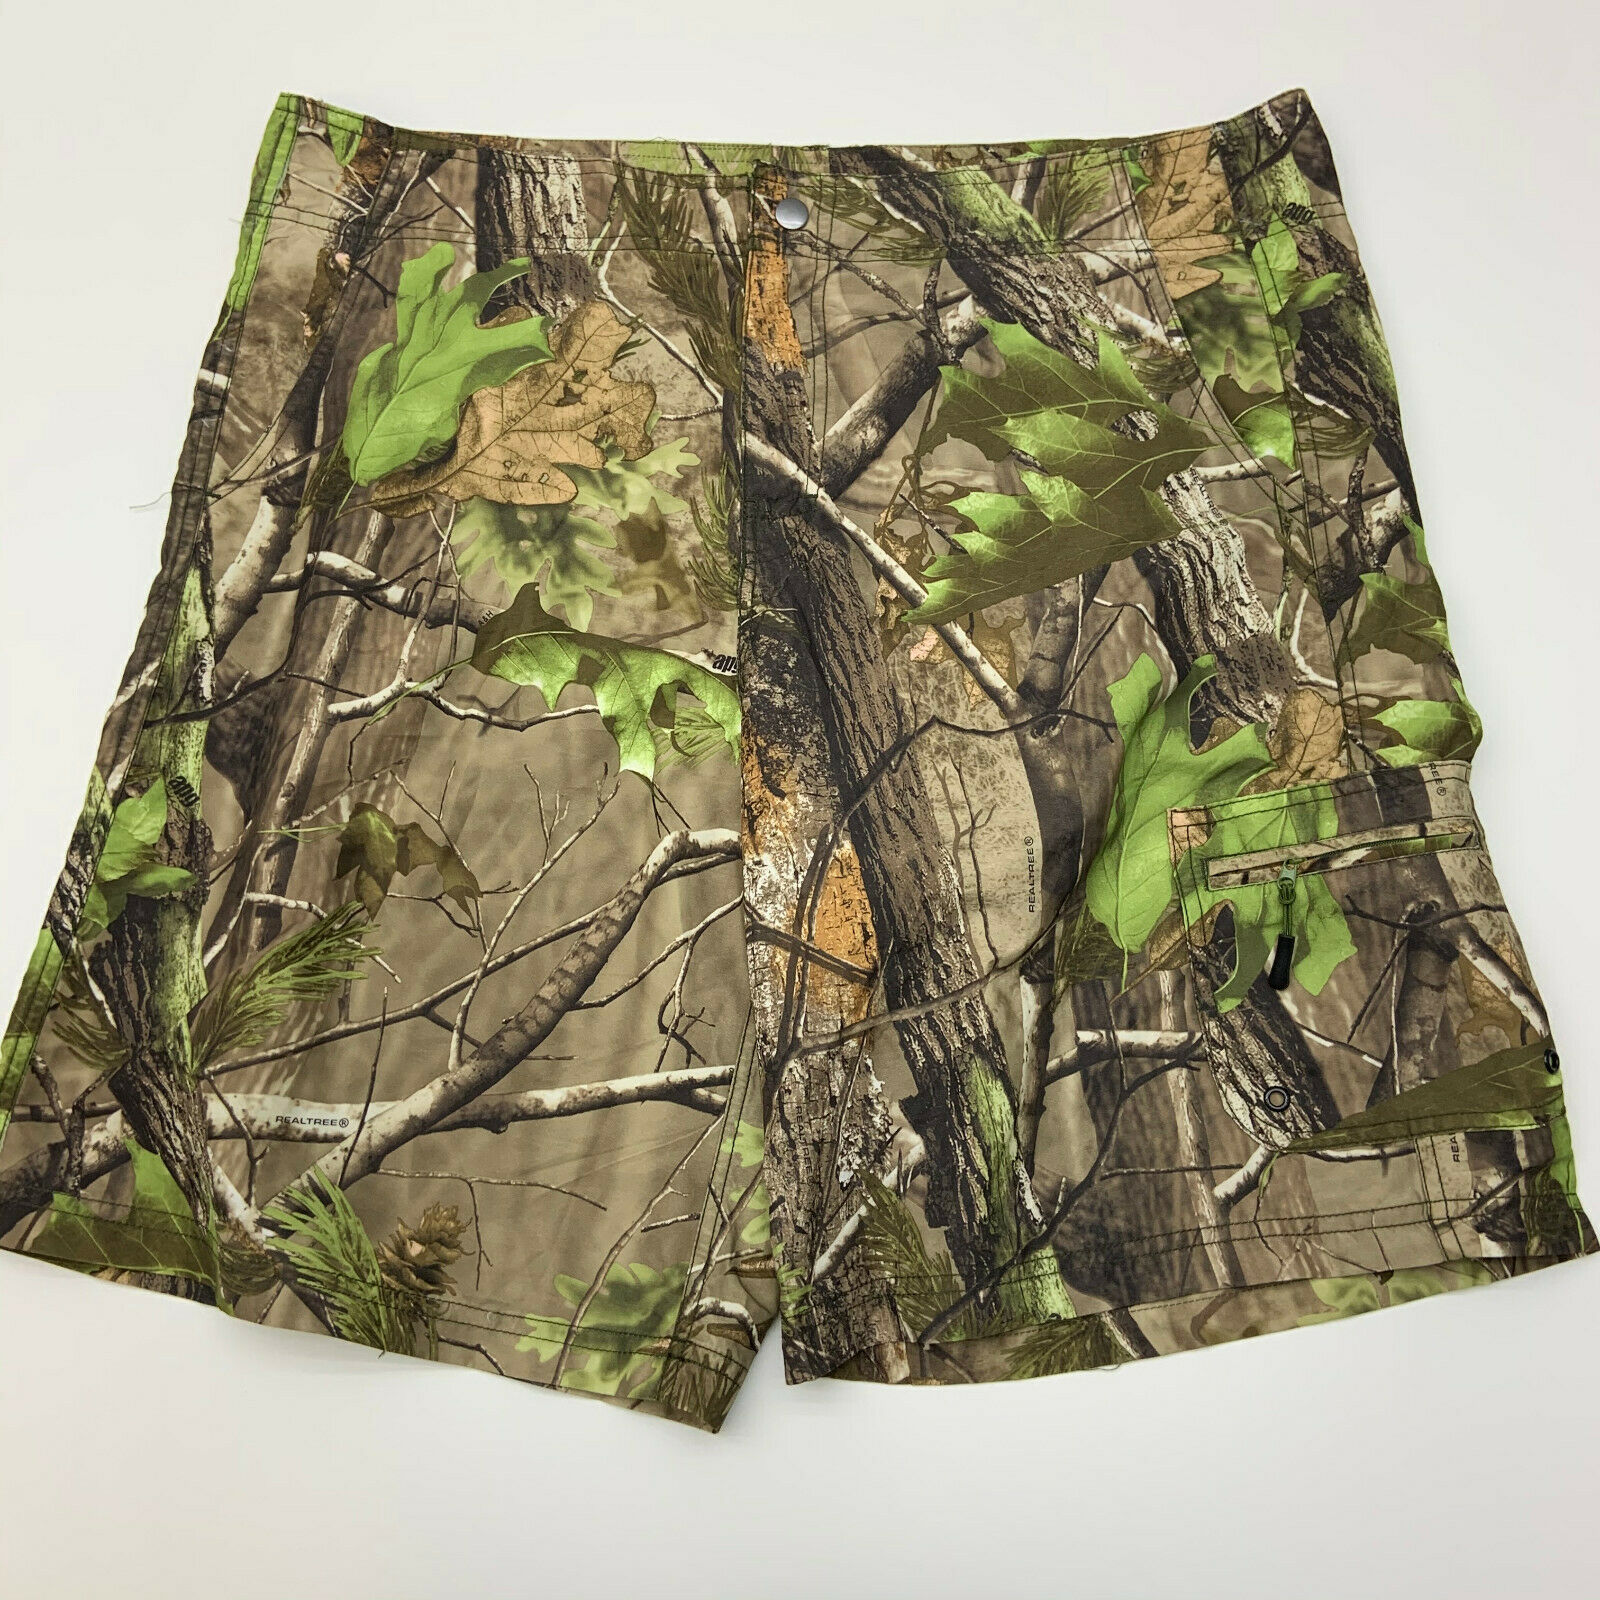 Realtree Camo Board Shorts Mens XXL Camouflage Polyester Casual Hunting ...